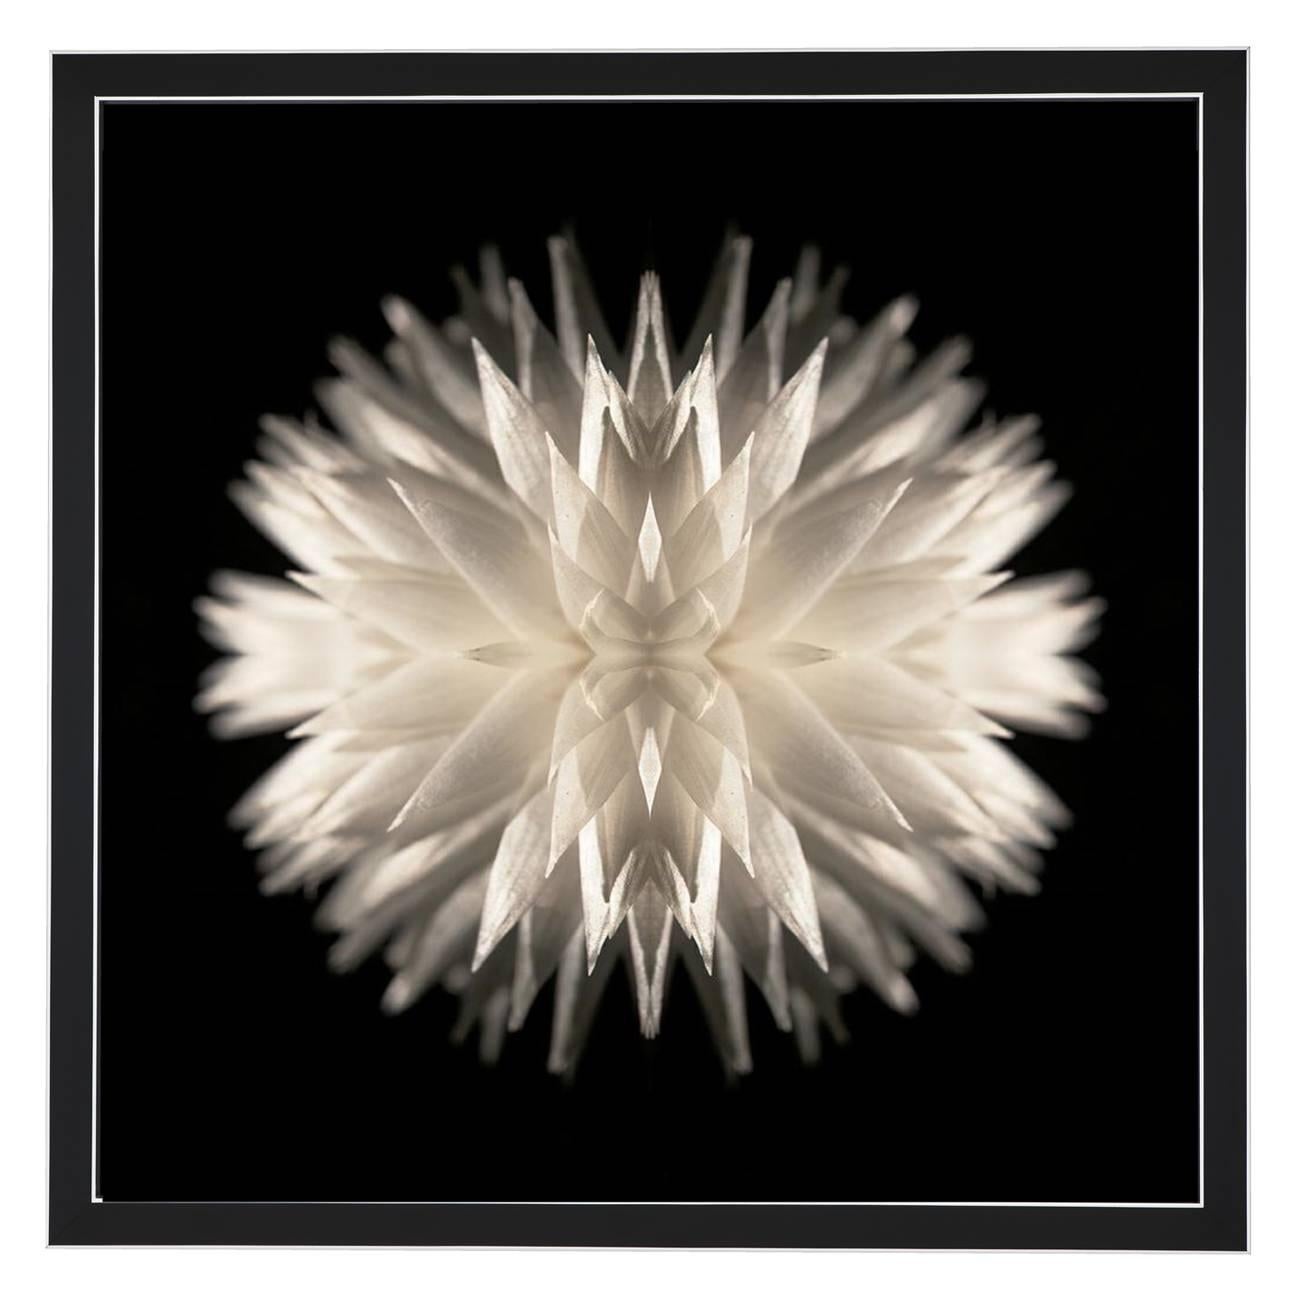 Composition:

Helichrysum (Everlasting) flower

Limited edition. Each image is uniquely printed directly to 5mm acrylic glass using UV cured pigment inks giving each photograph real depth and clarity. Every picture is beautifully framed in-house